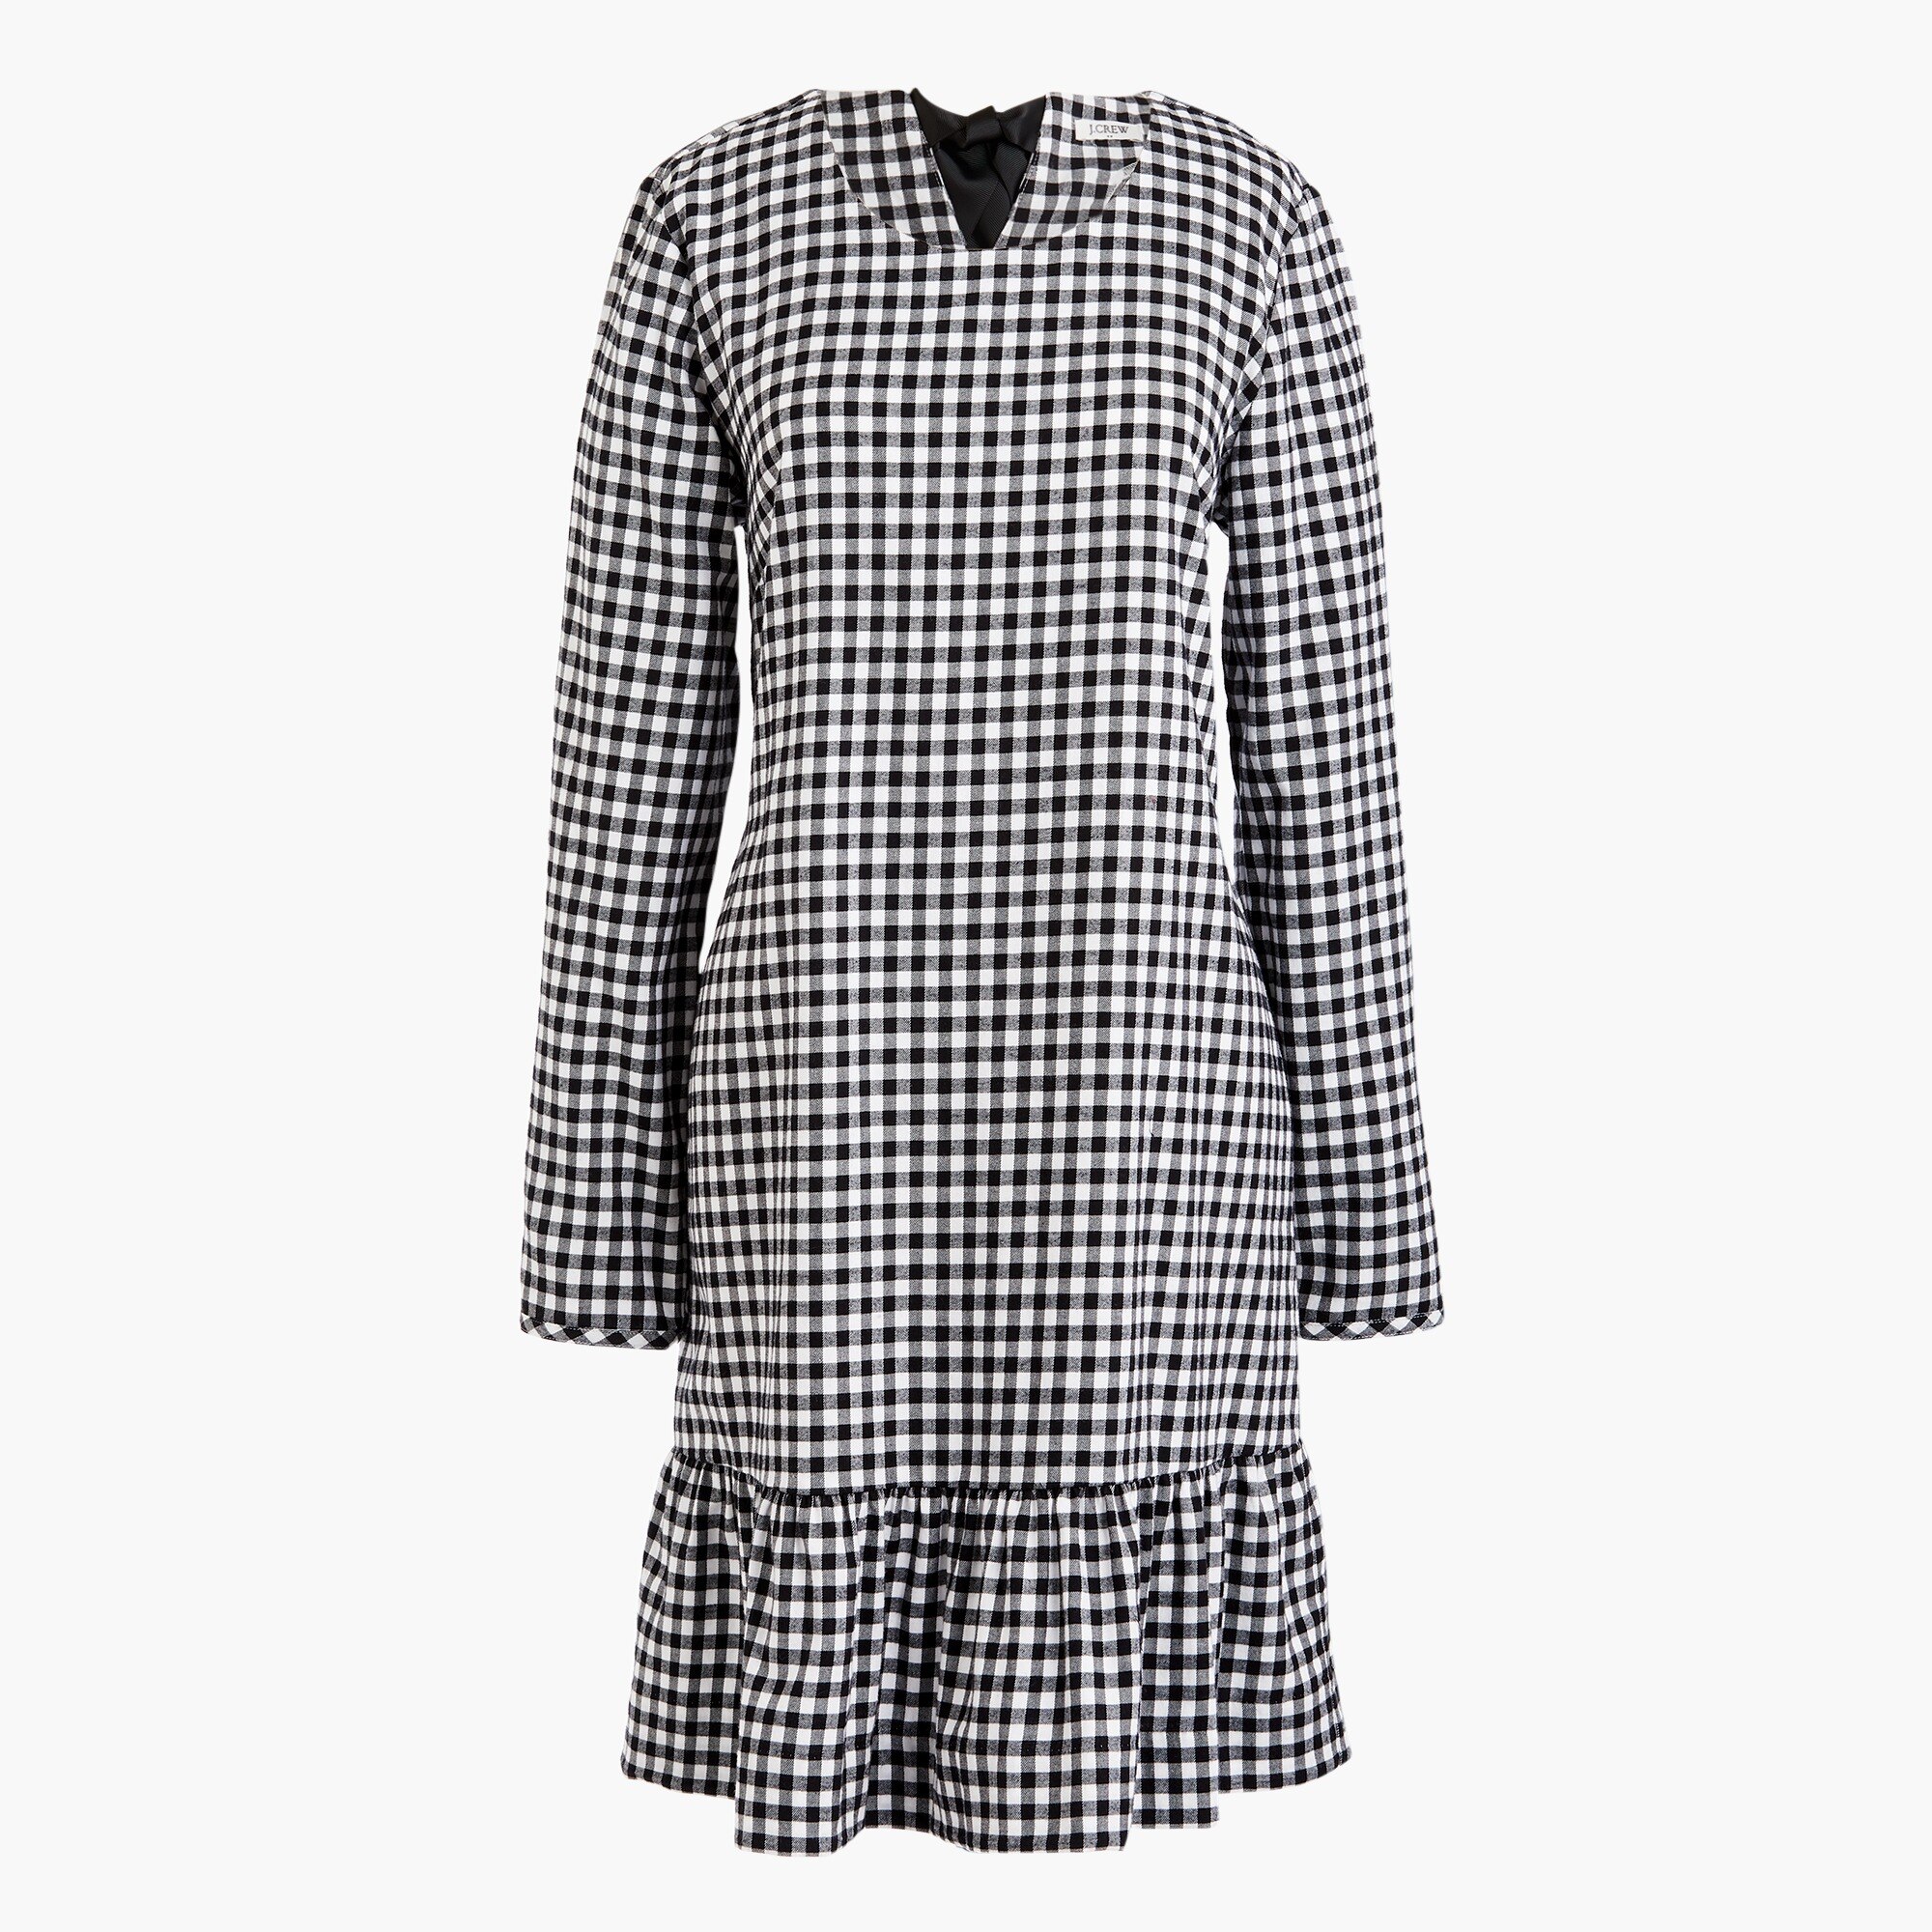 dresses - casual & party dresses for women | j.crew factory